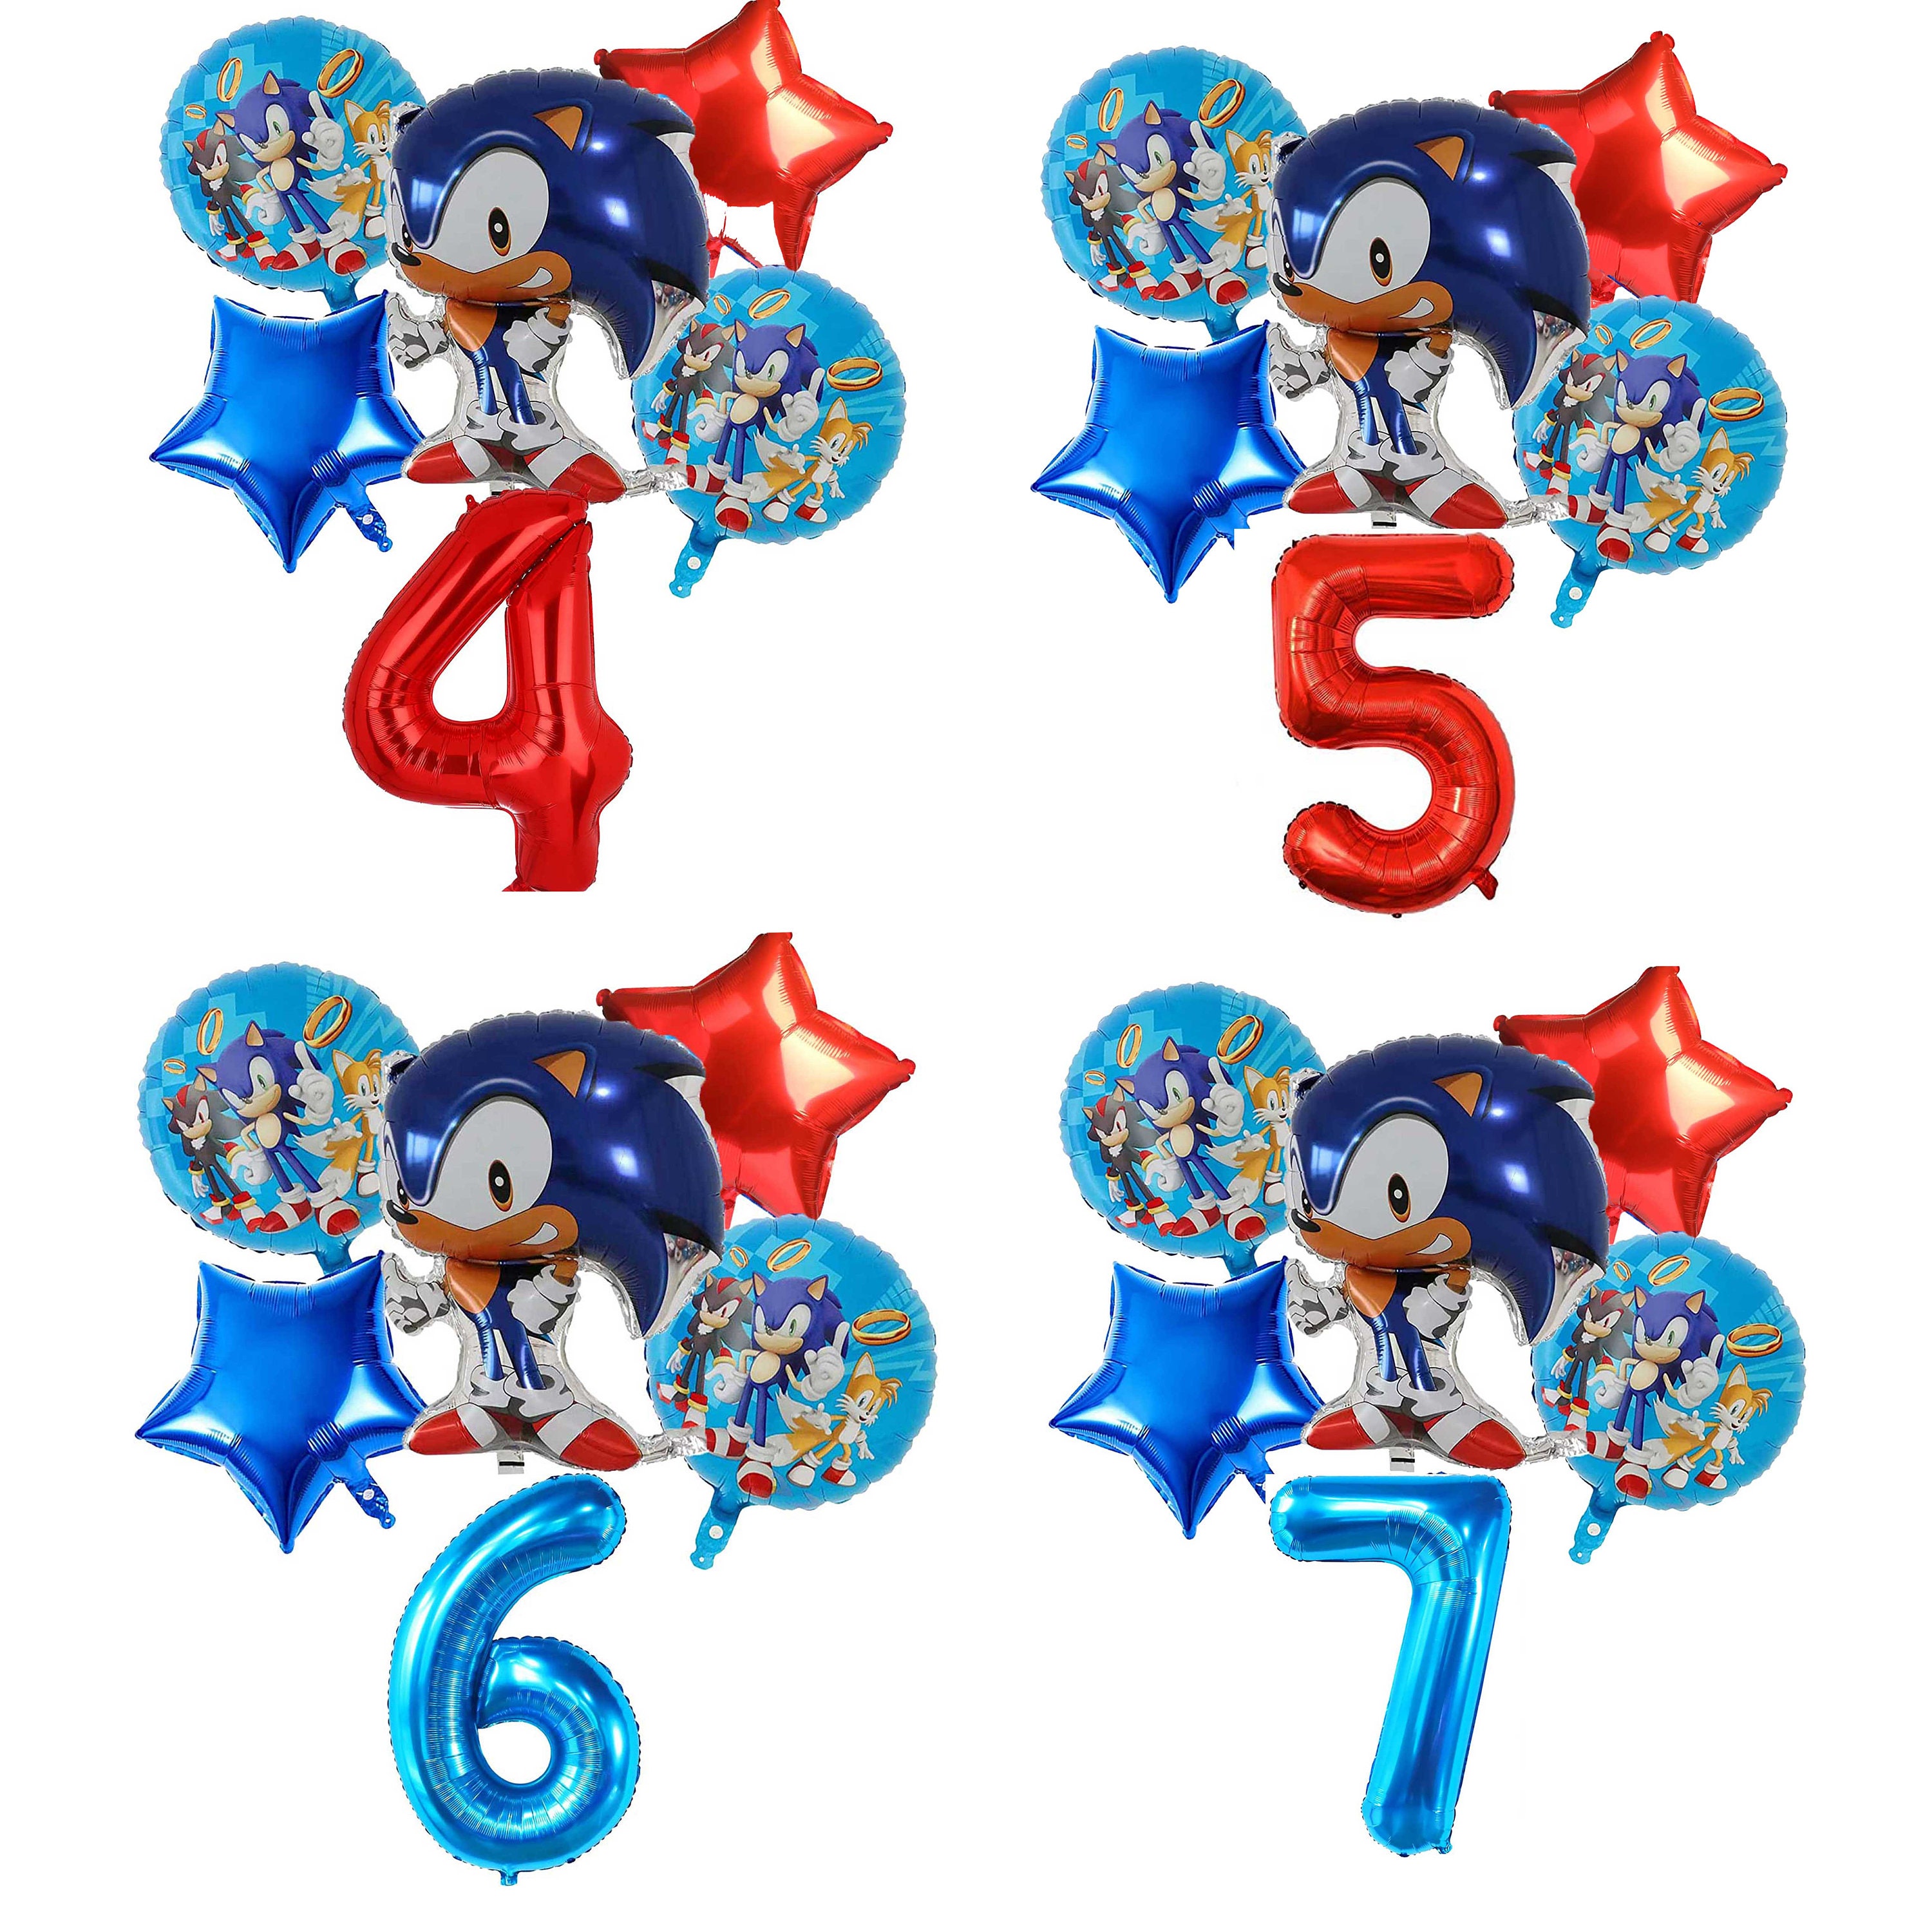 Birthday Sonic Balloons, Hedgehog Party Supplies Boy's 5th